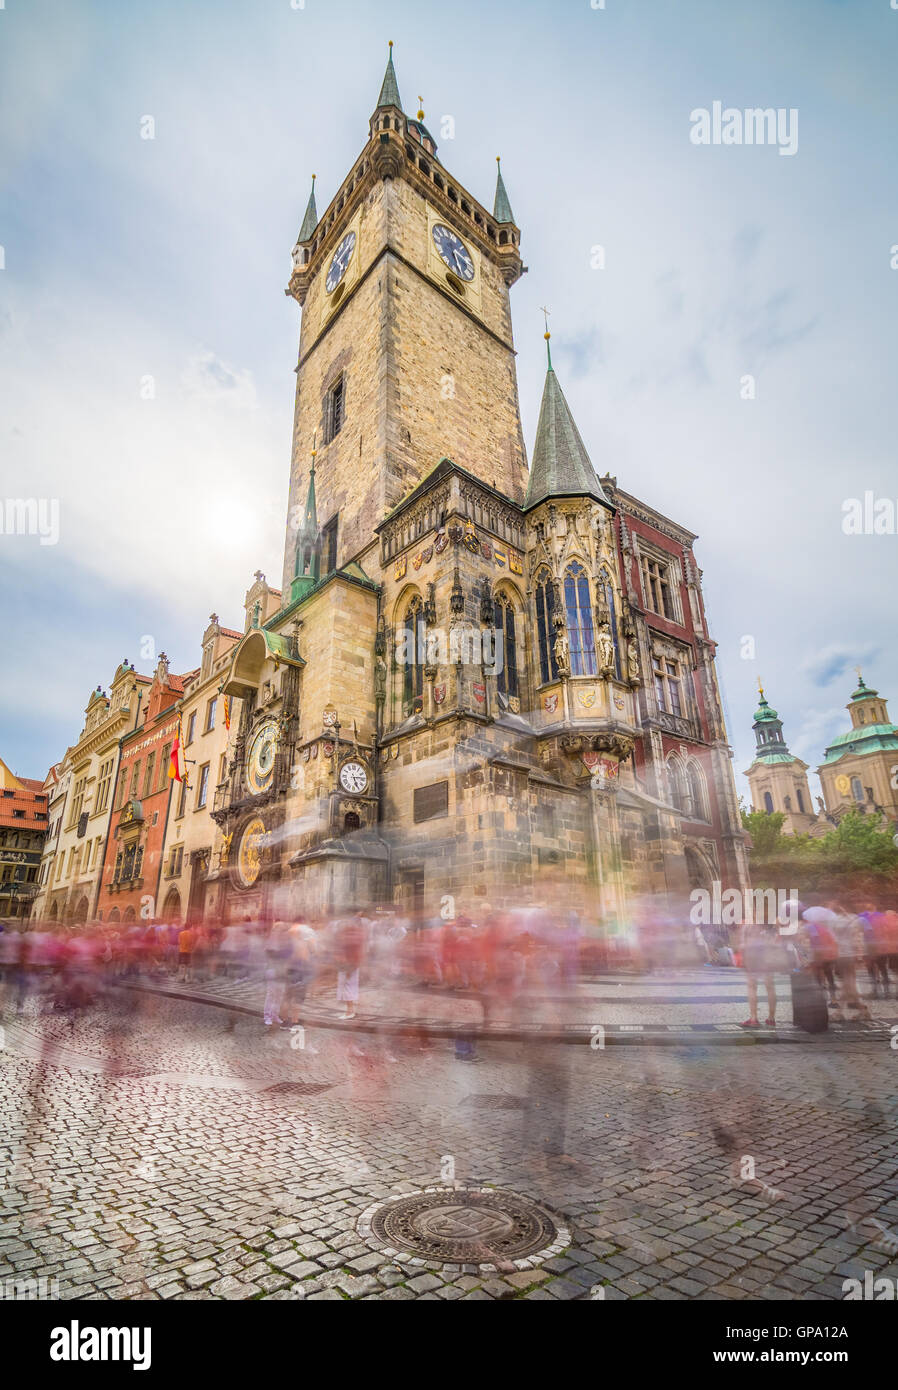 The Old Town Hall, Prague, Czech Republic, is one of the most famous attractions in the city. It is located in Old Town Square, Stock Photo